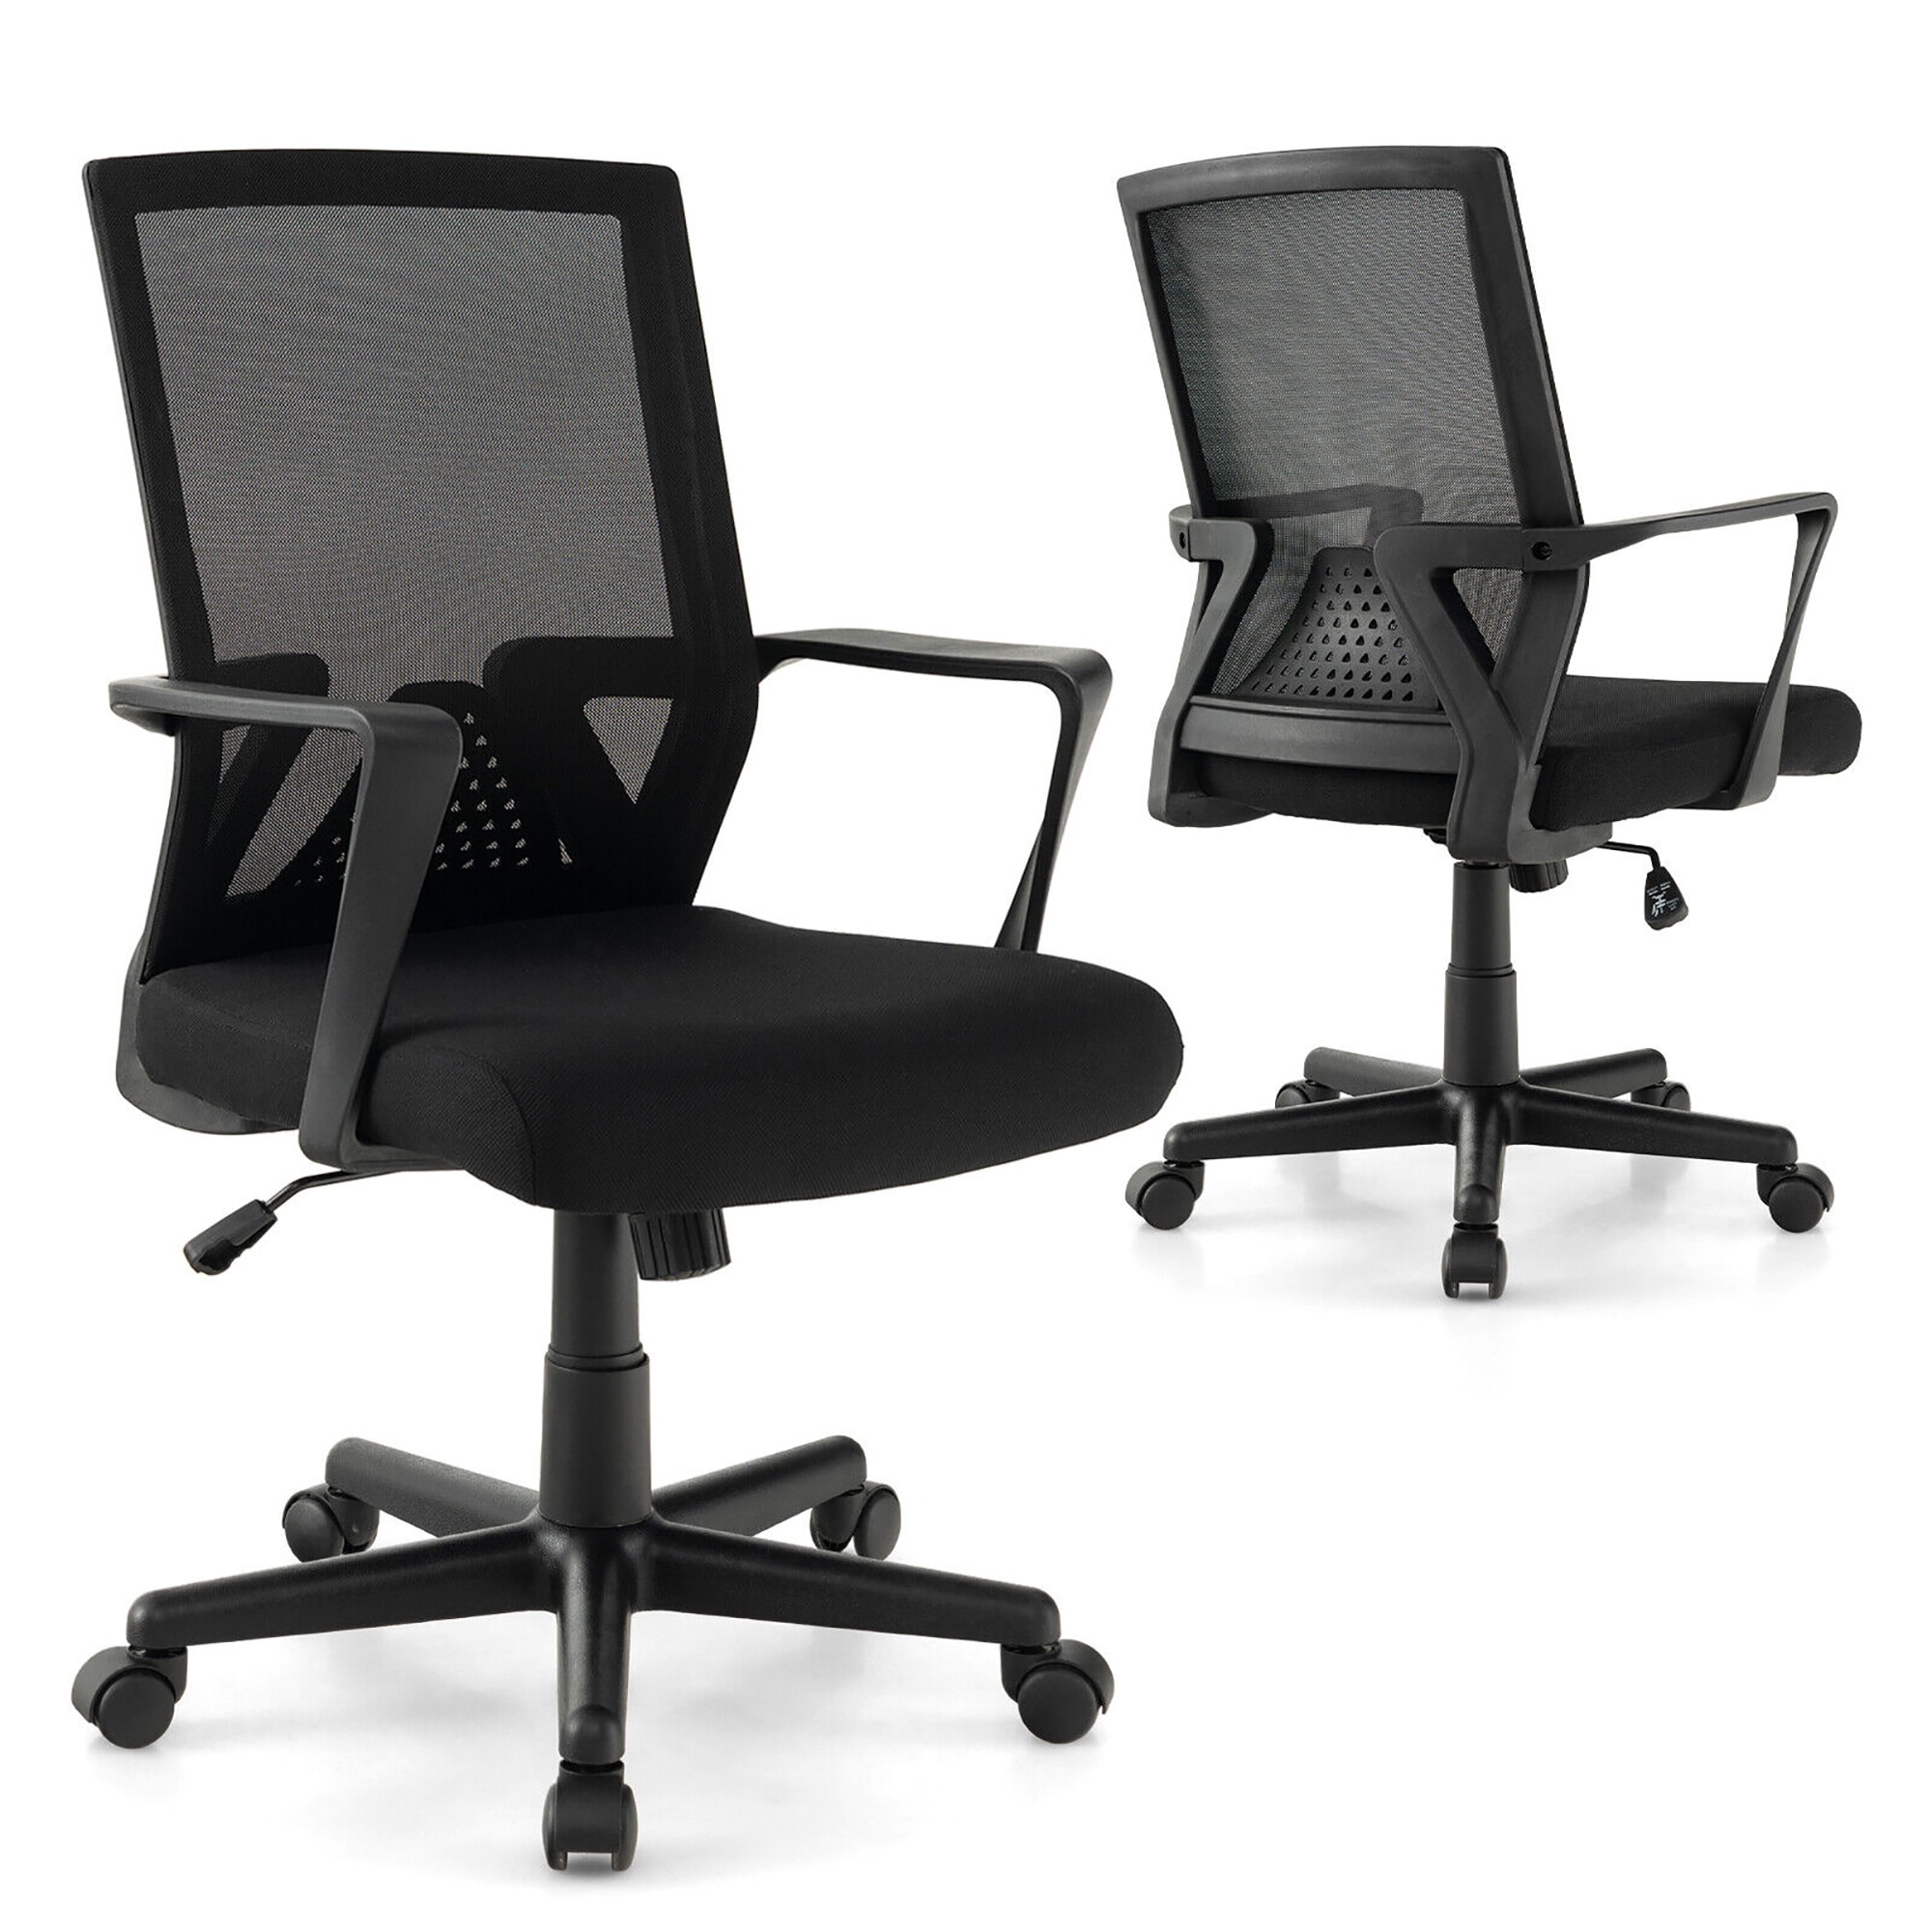 https://ak1.ostkcdn.com/images/products/is/images/direct/1636561b0422b49f334be1d4c446336aff56decf/Gymax-Ergonomic-Office-Chair-Mesh-Computer-Desk-Chair-w--Armrests.jpg